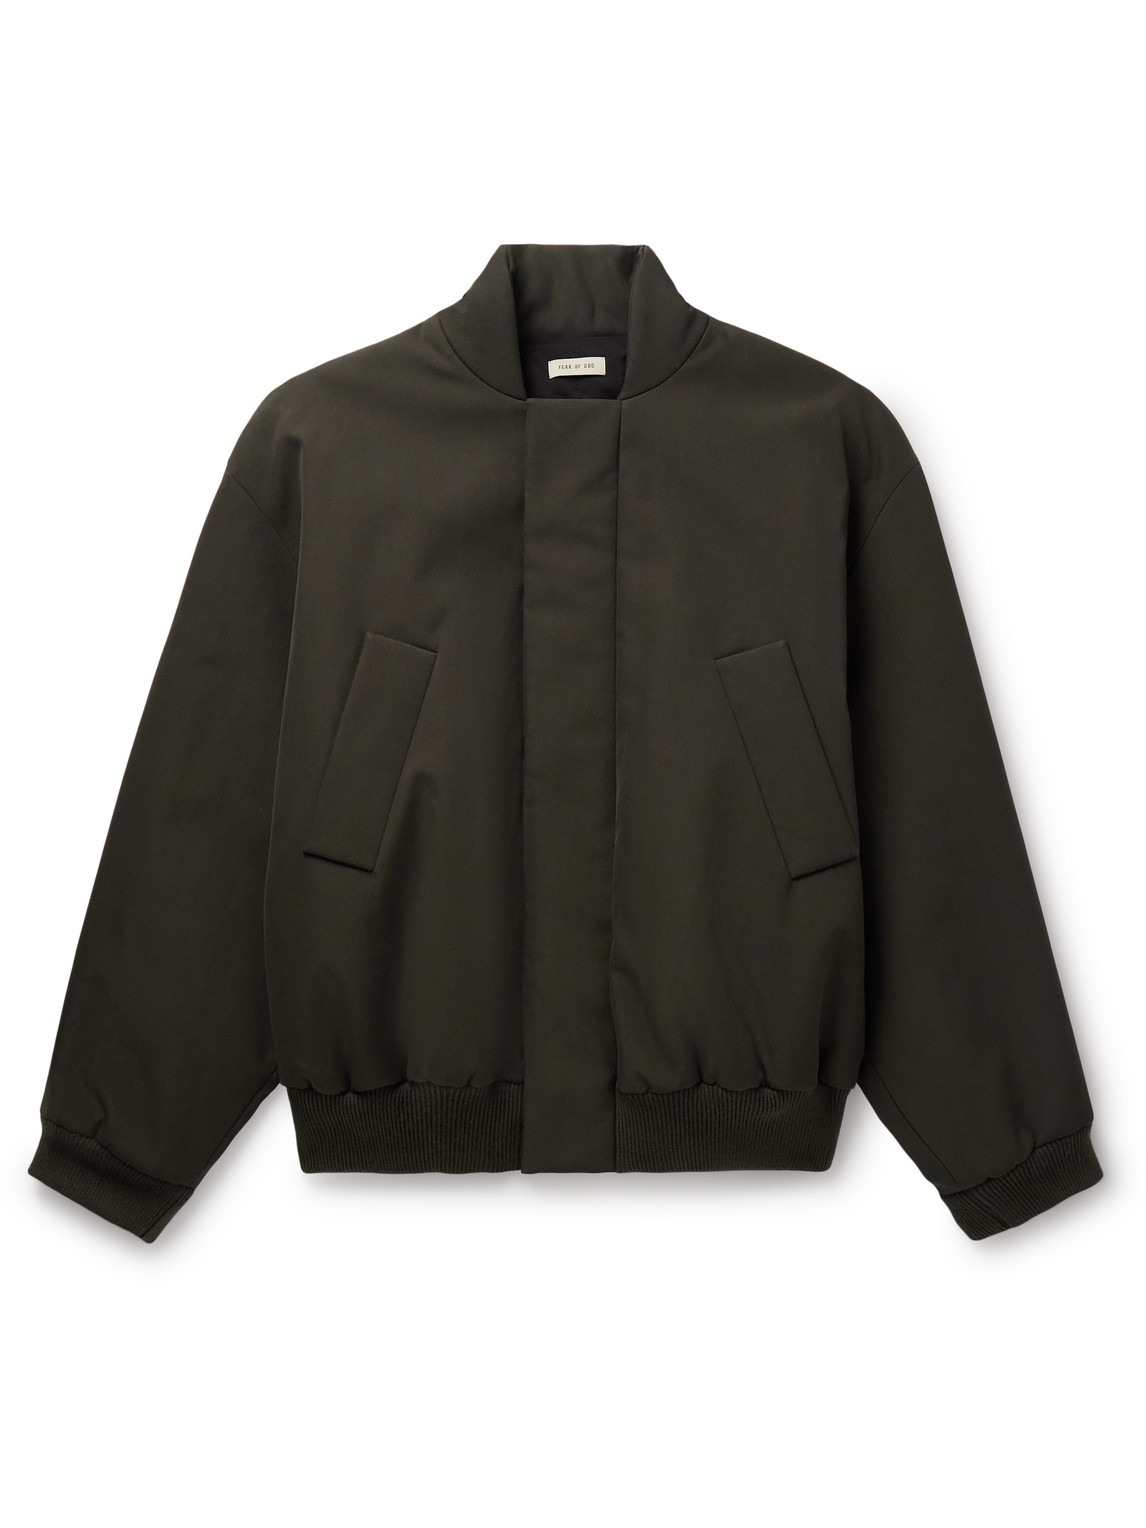 Fear of God - Virgin Wool and Cotton-Blend Twill Bomber Jacket - Men - Green - M von Fear of God